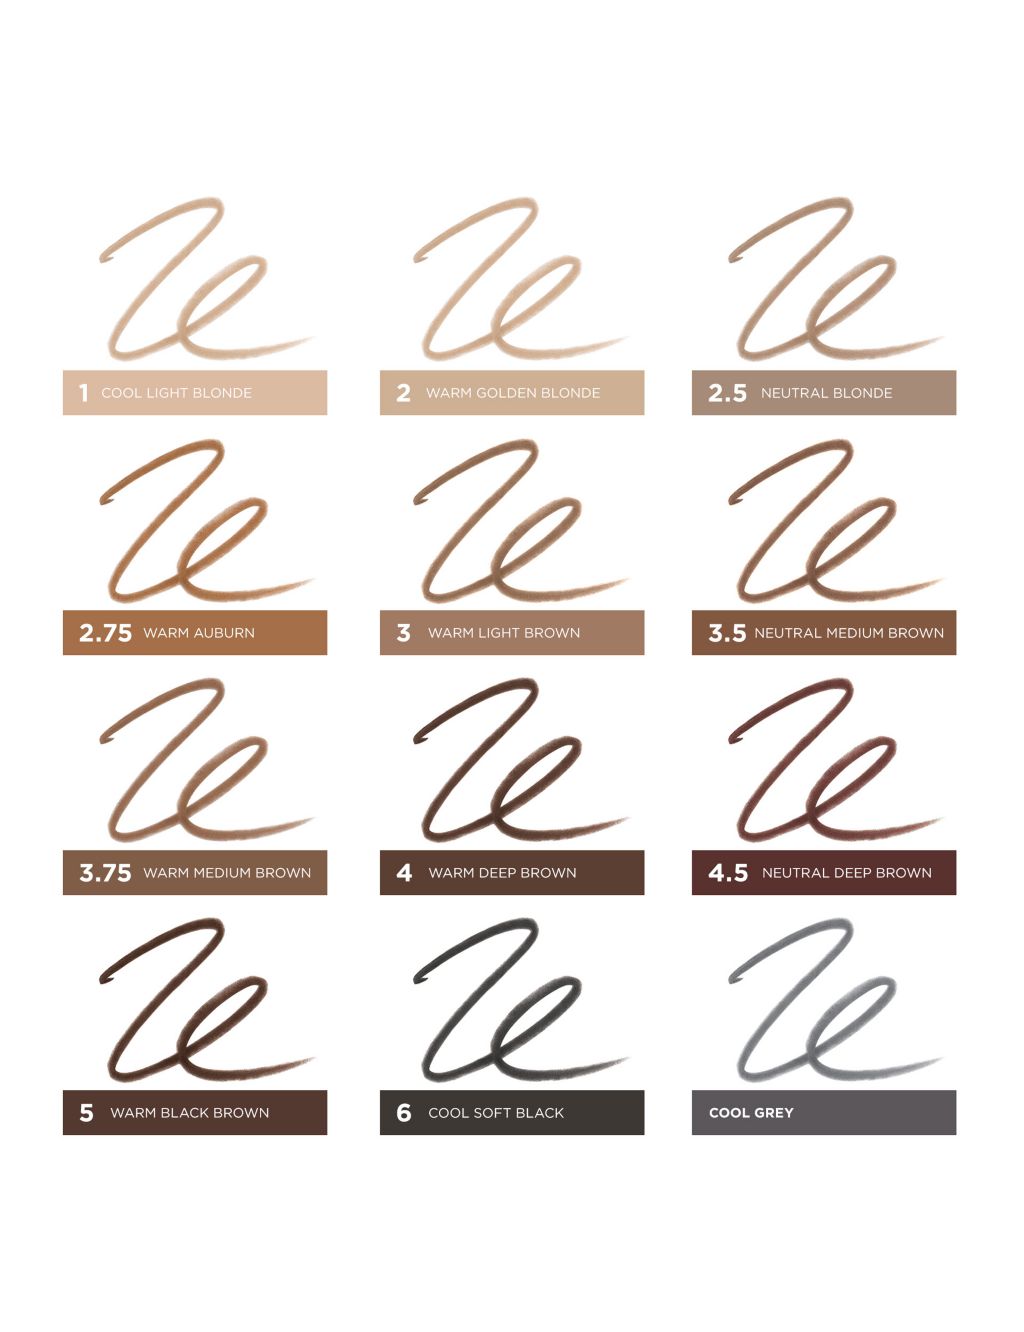 Precisely, My Brow Eyebrow Pencil Mini 0.04g 8 of 8